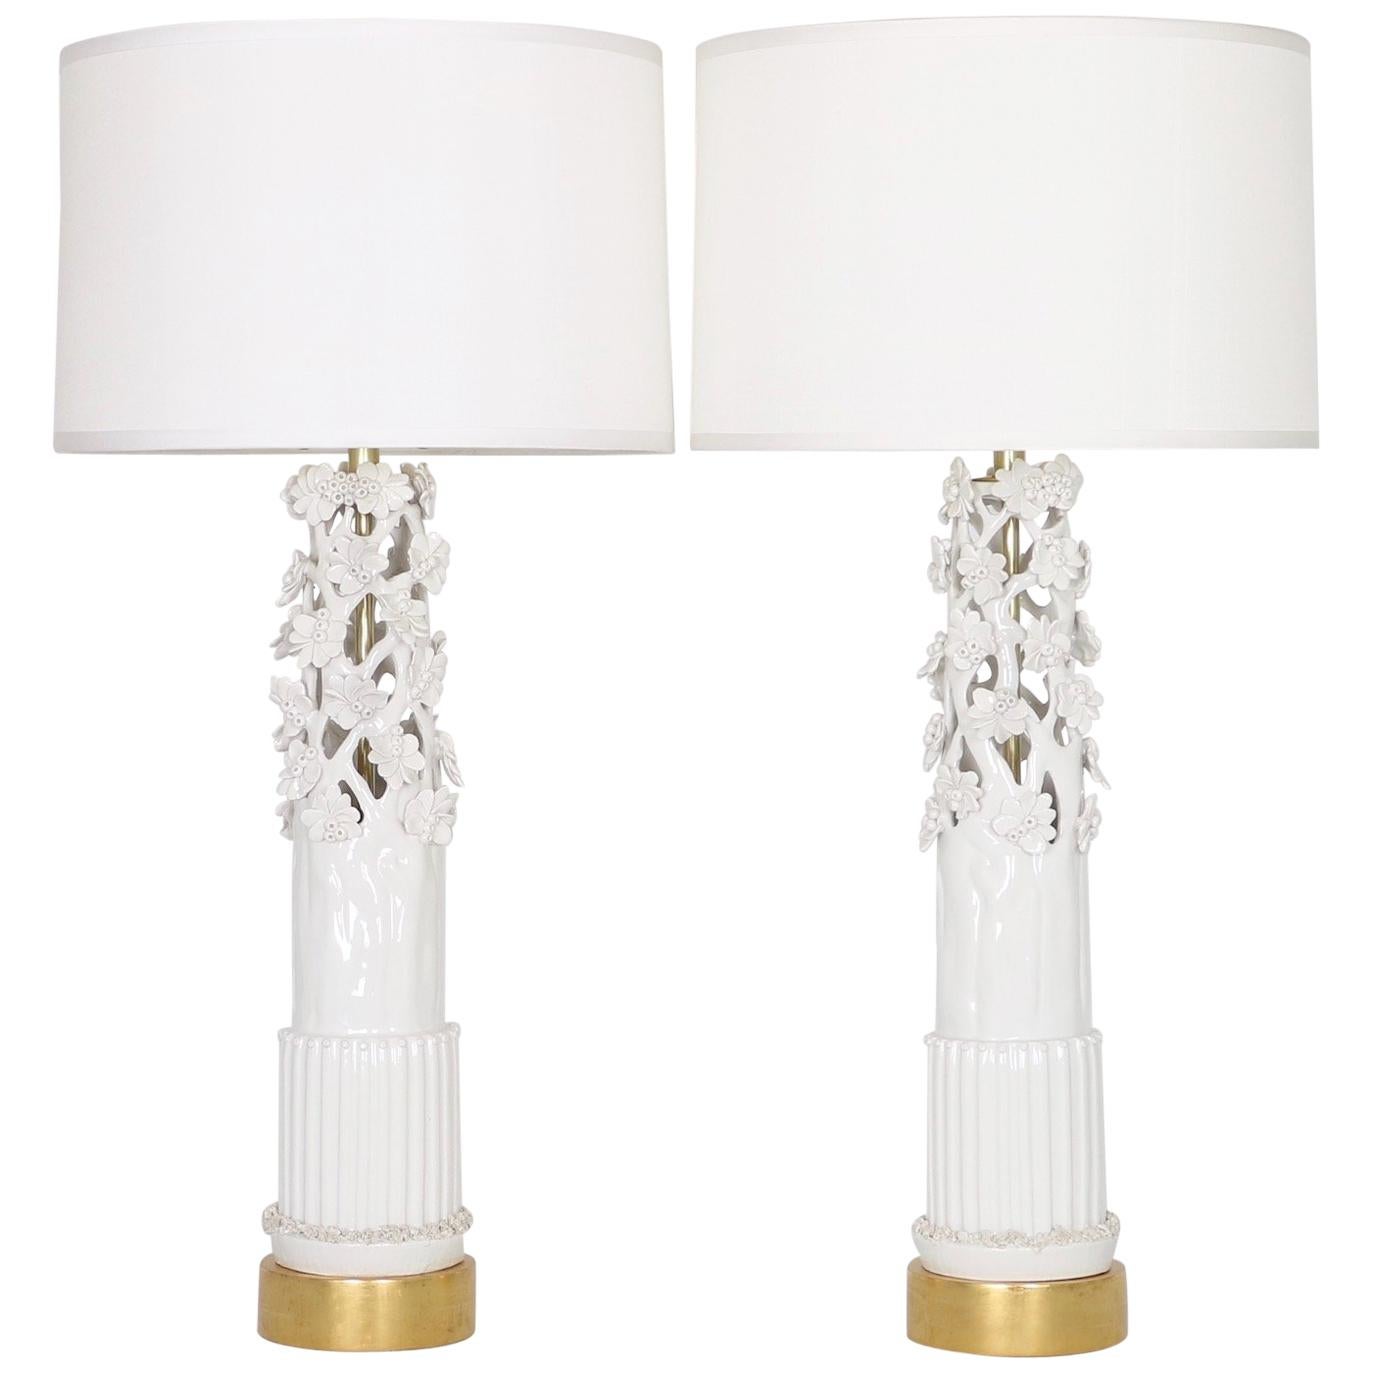 Marbro Lamp Co. Hollywood Regency White Ceramic Lamps with Sculptural Flowers